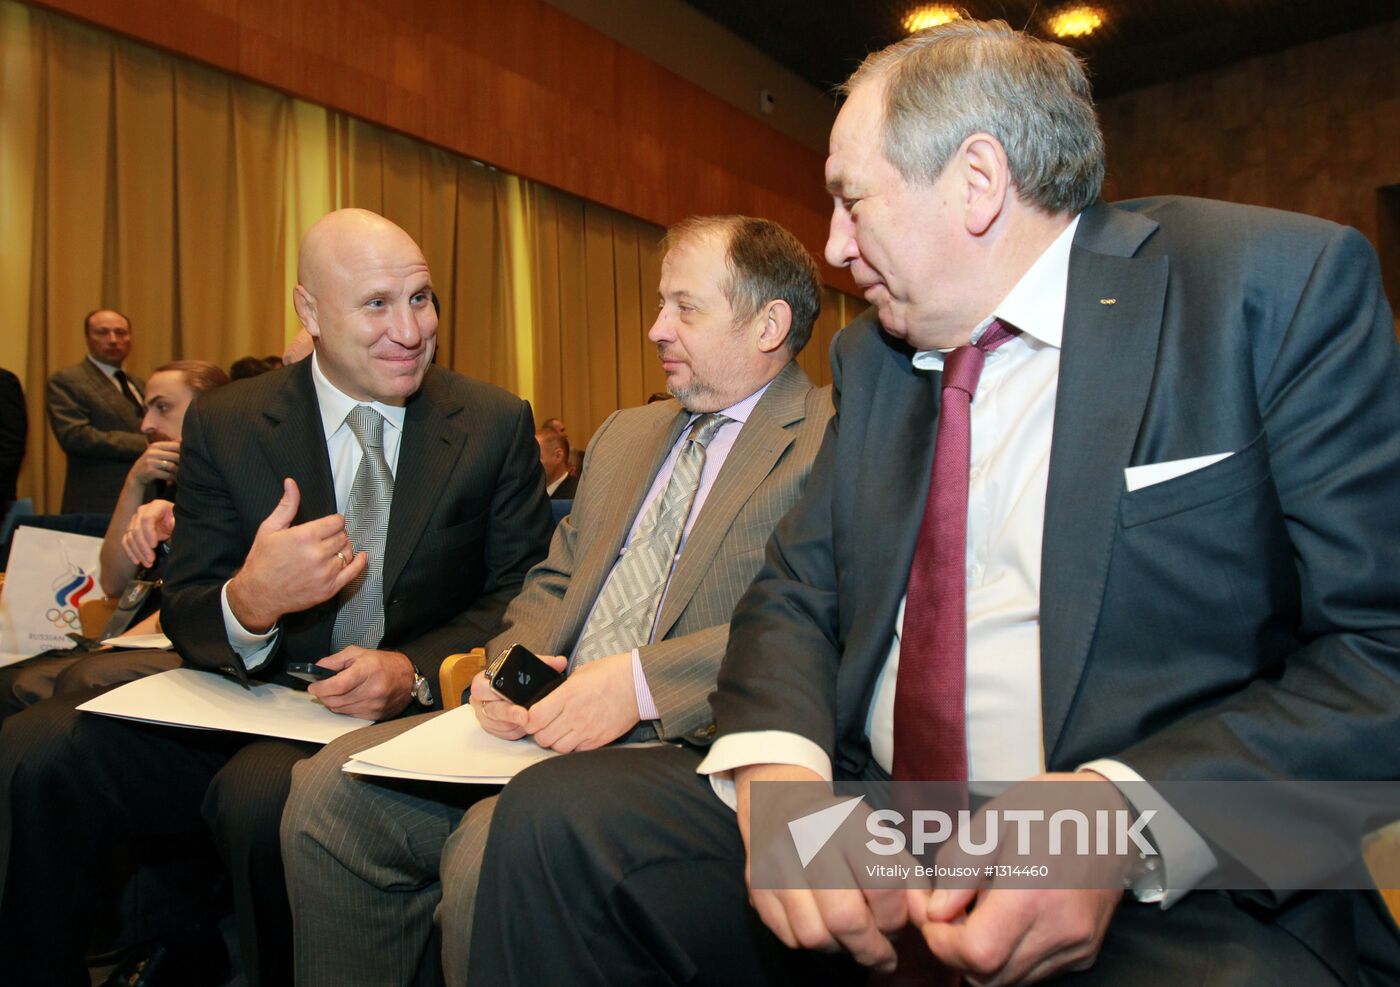 Meeting of Russian Olympic Committee